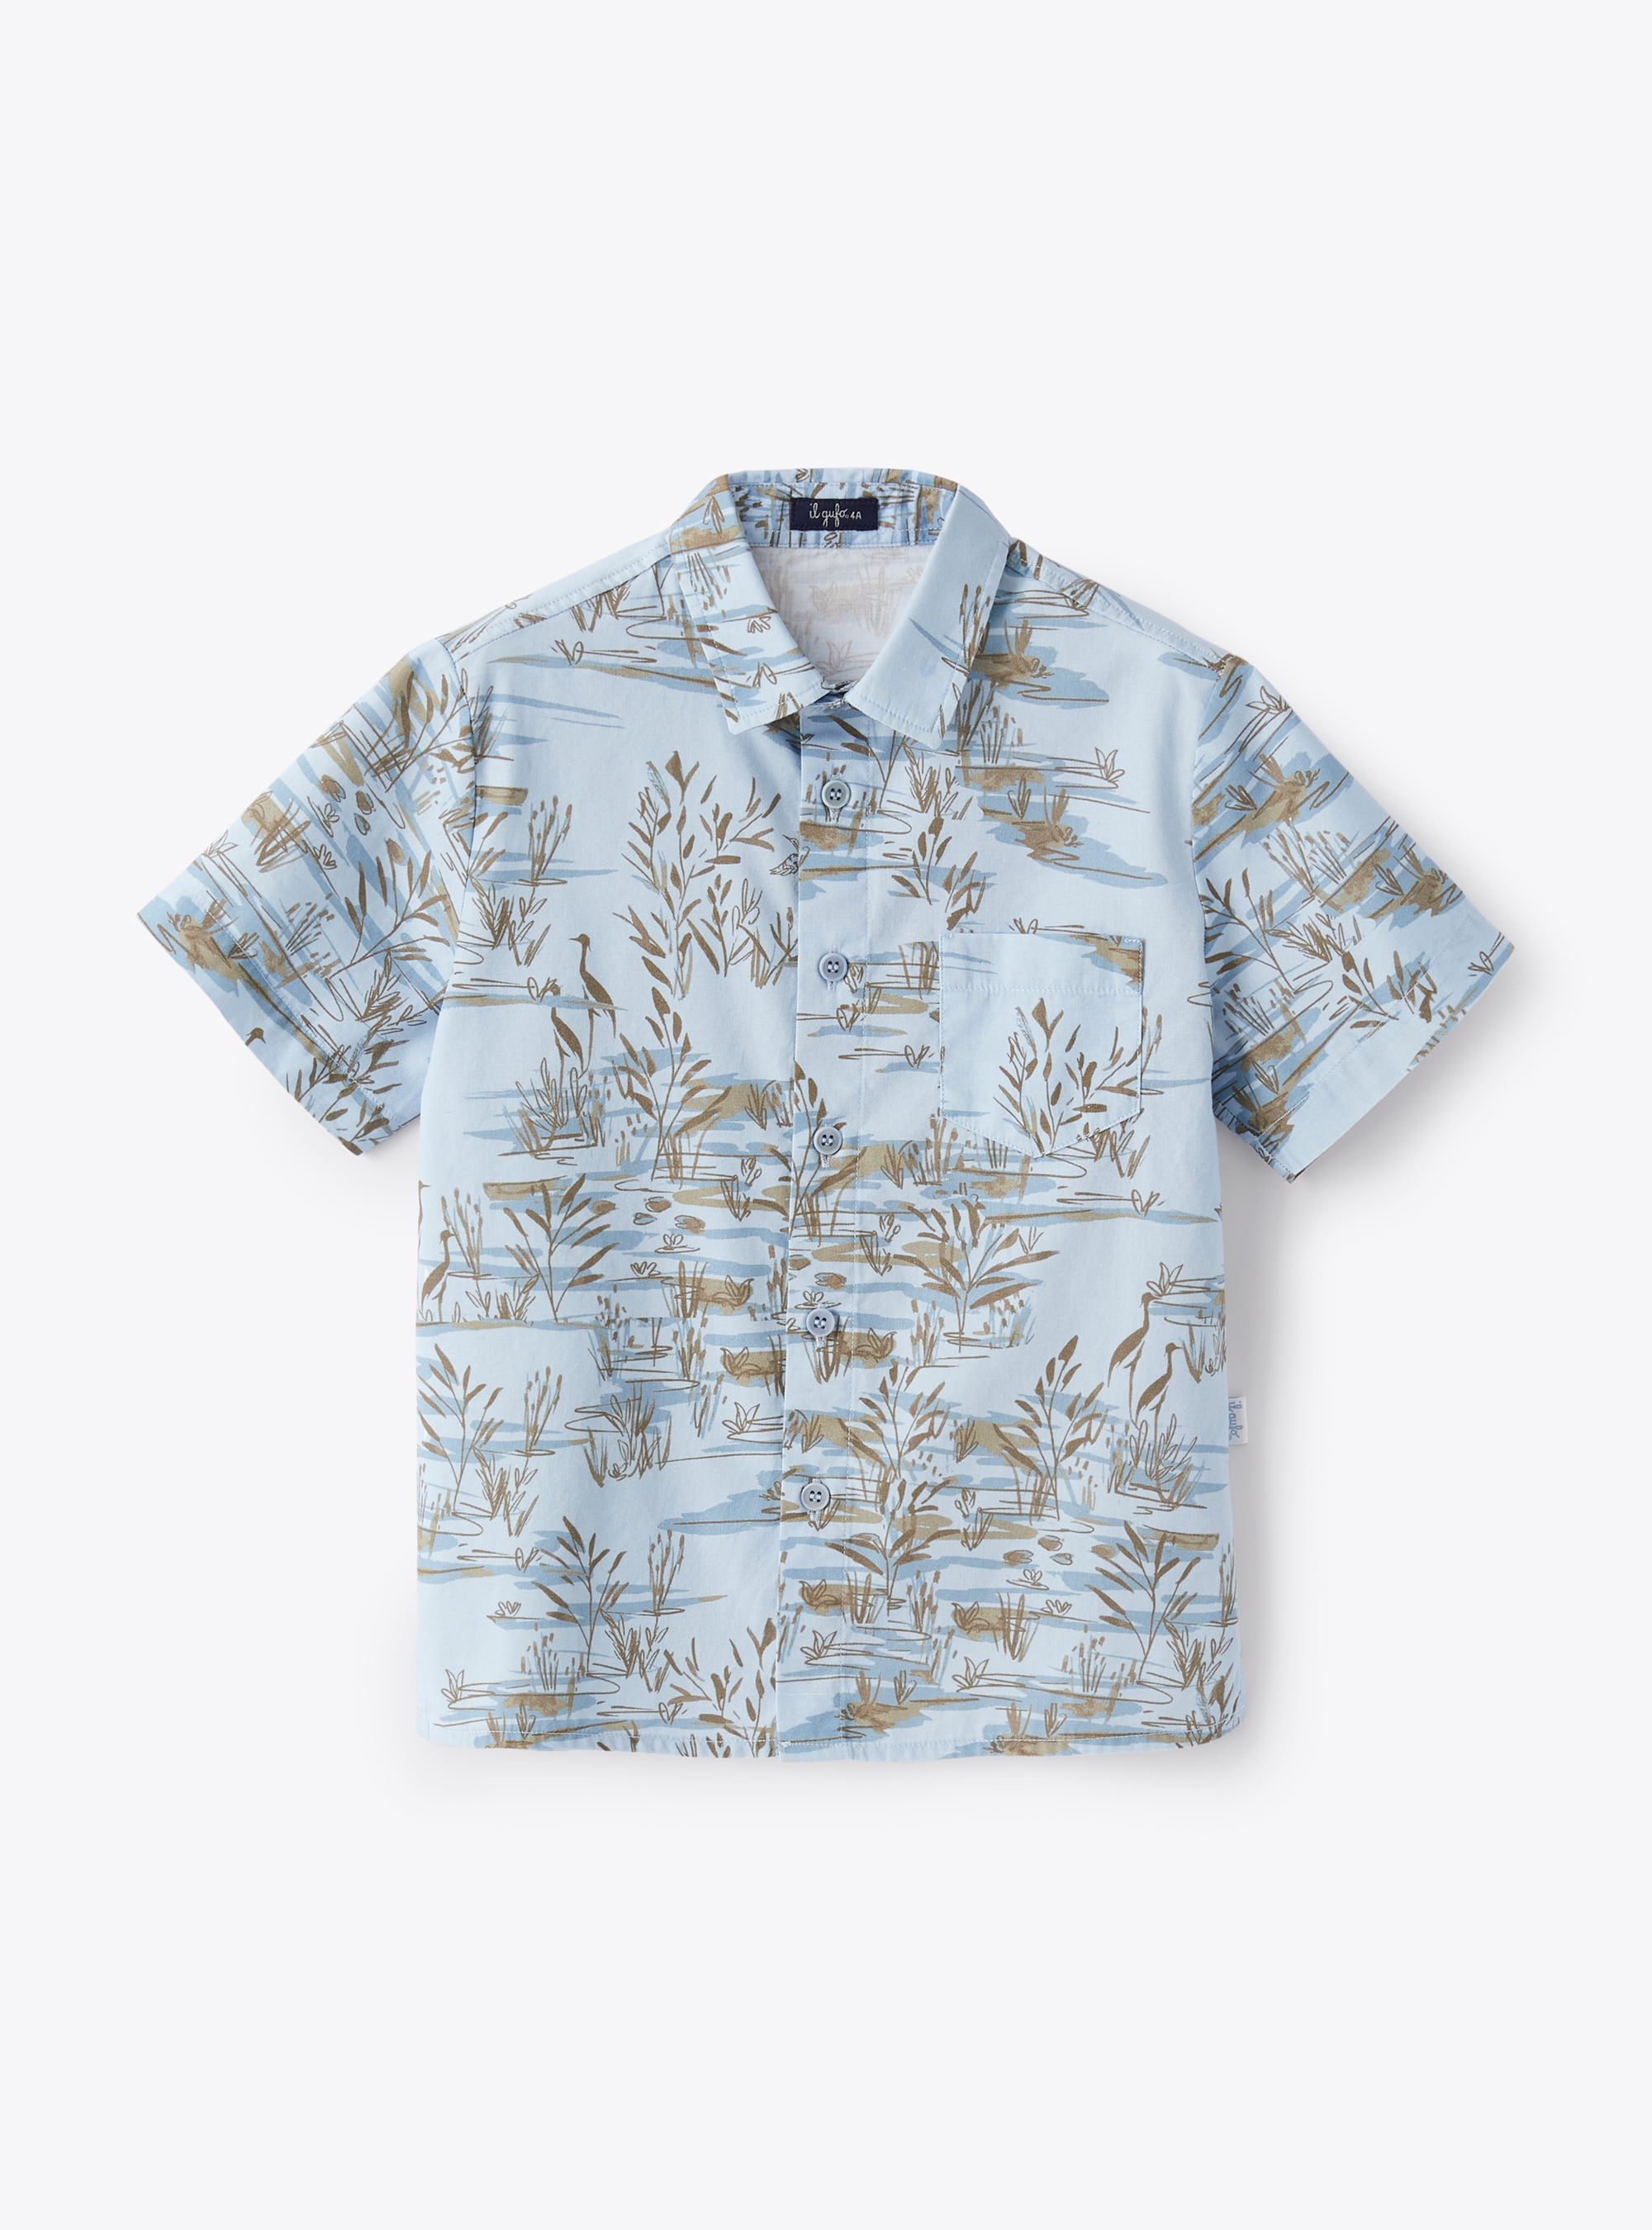 Short-sleeve shirt with exclusive print design - Light blue | Il Gufo